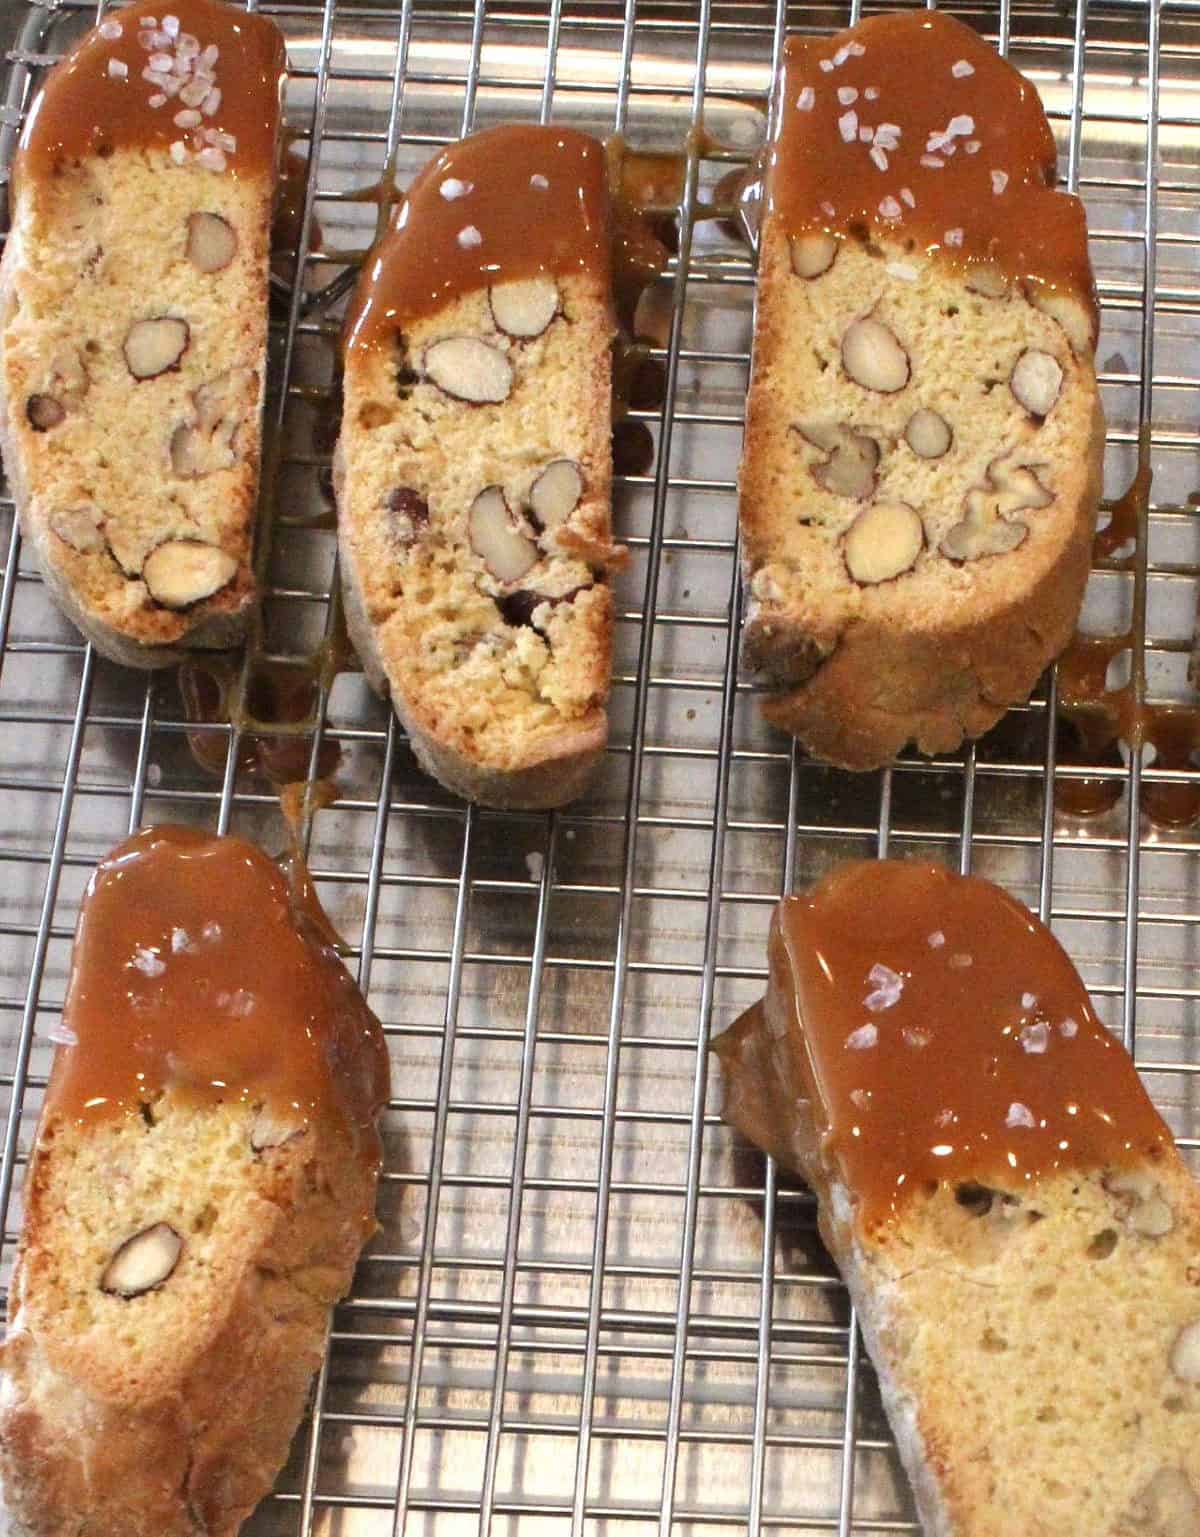  Enjoy a little afternoon treat with our crunchy and sweet Pecan-Caramel Biscotti.